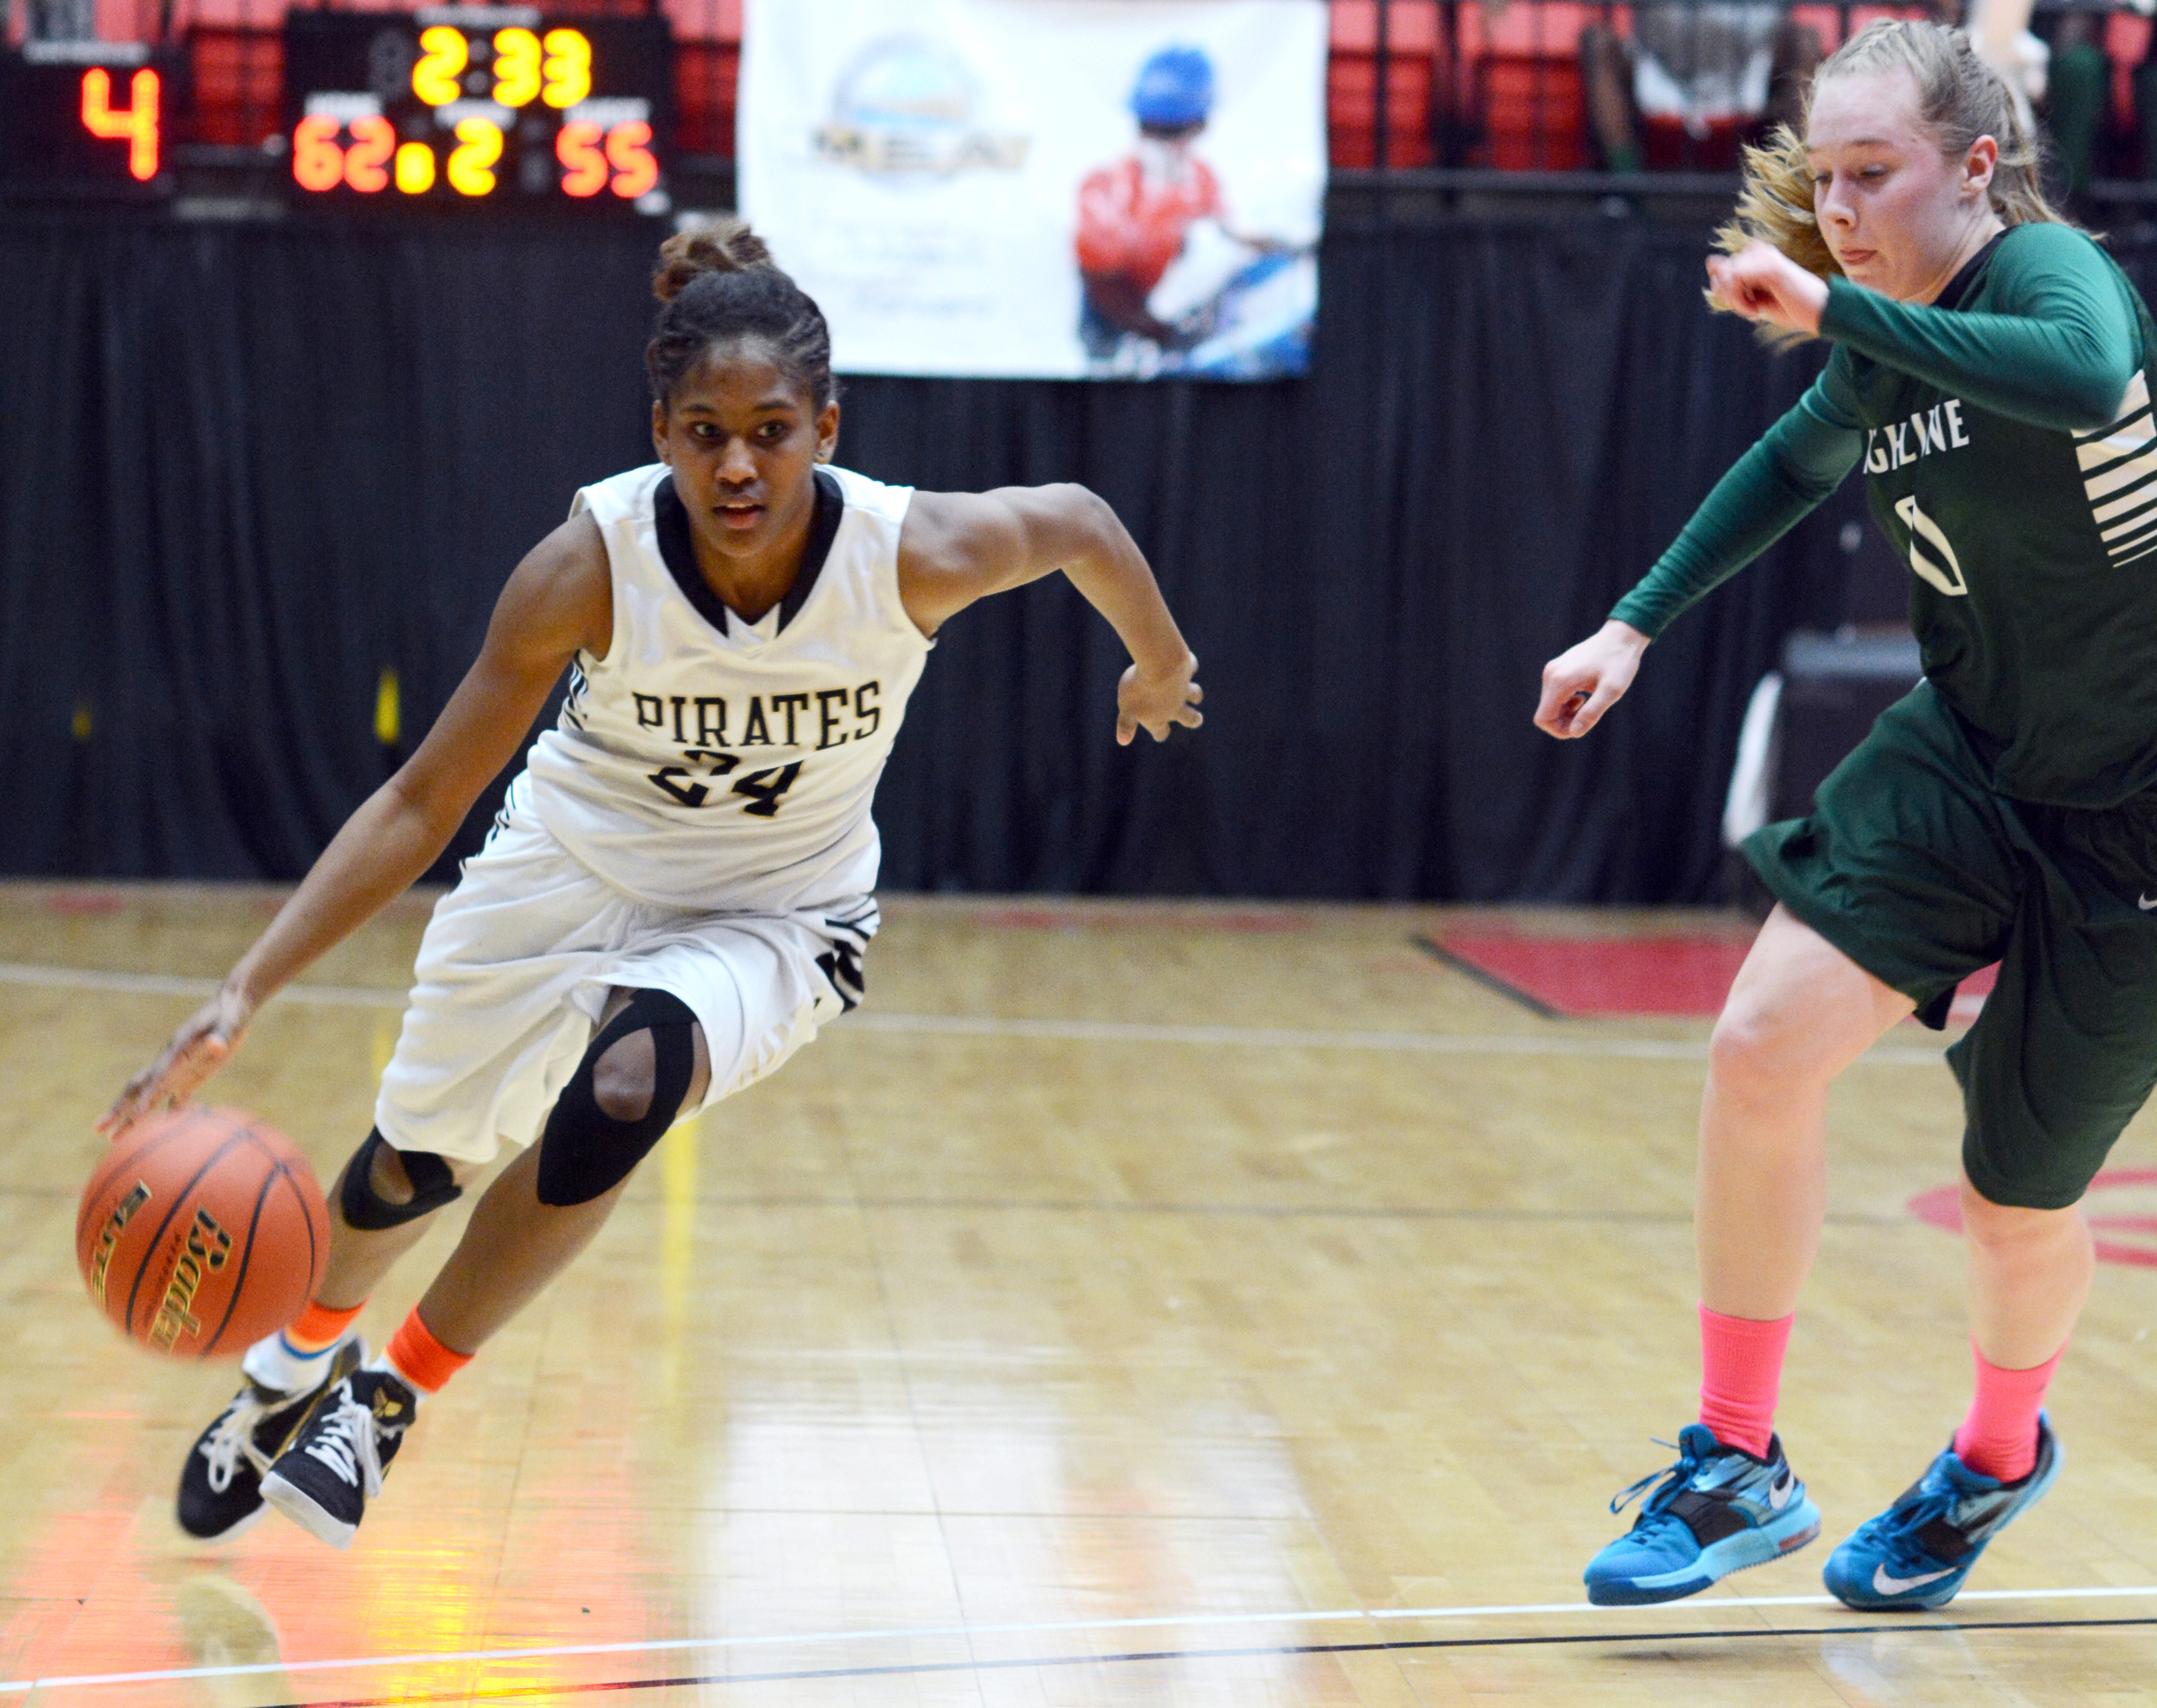 Peninsula point guard Imani Smith speeds past Alyson Rippingham during the Pirates' 69-55 win in the NWAC tournament quarterfinals. Smith led Peninsula with 20 points. (Rick Ross)